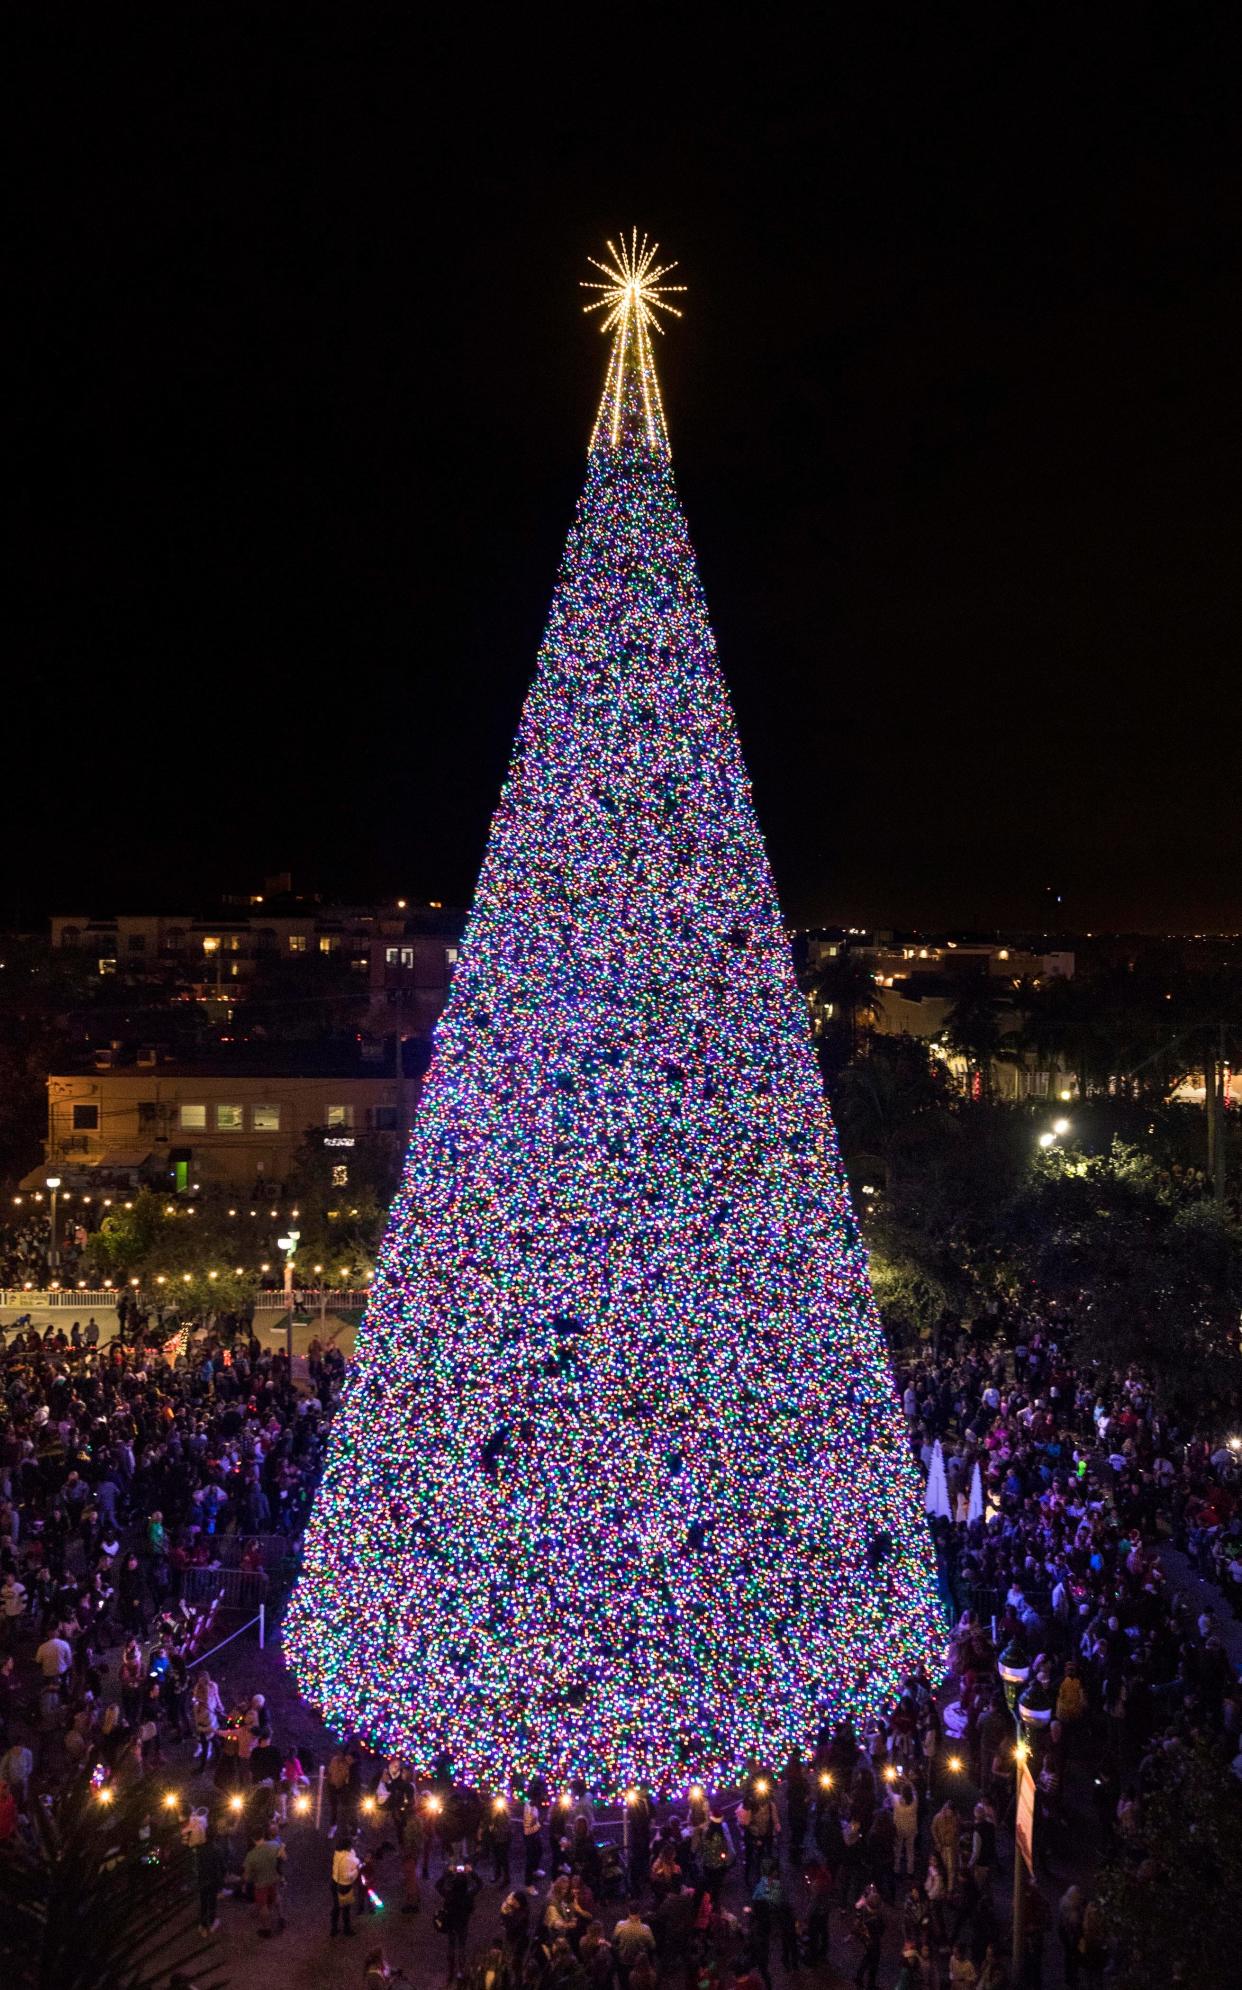 Delray Beach's massive 100-foot Christmas tree will be lit on Nov. 28 and coincide with their Yuletide Street Fair.